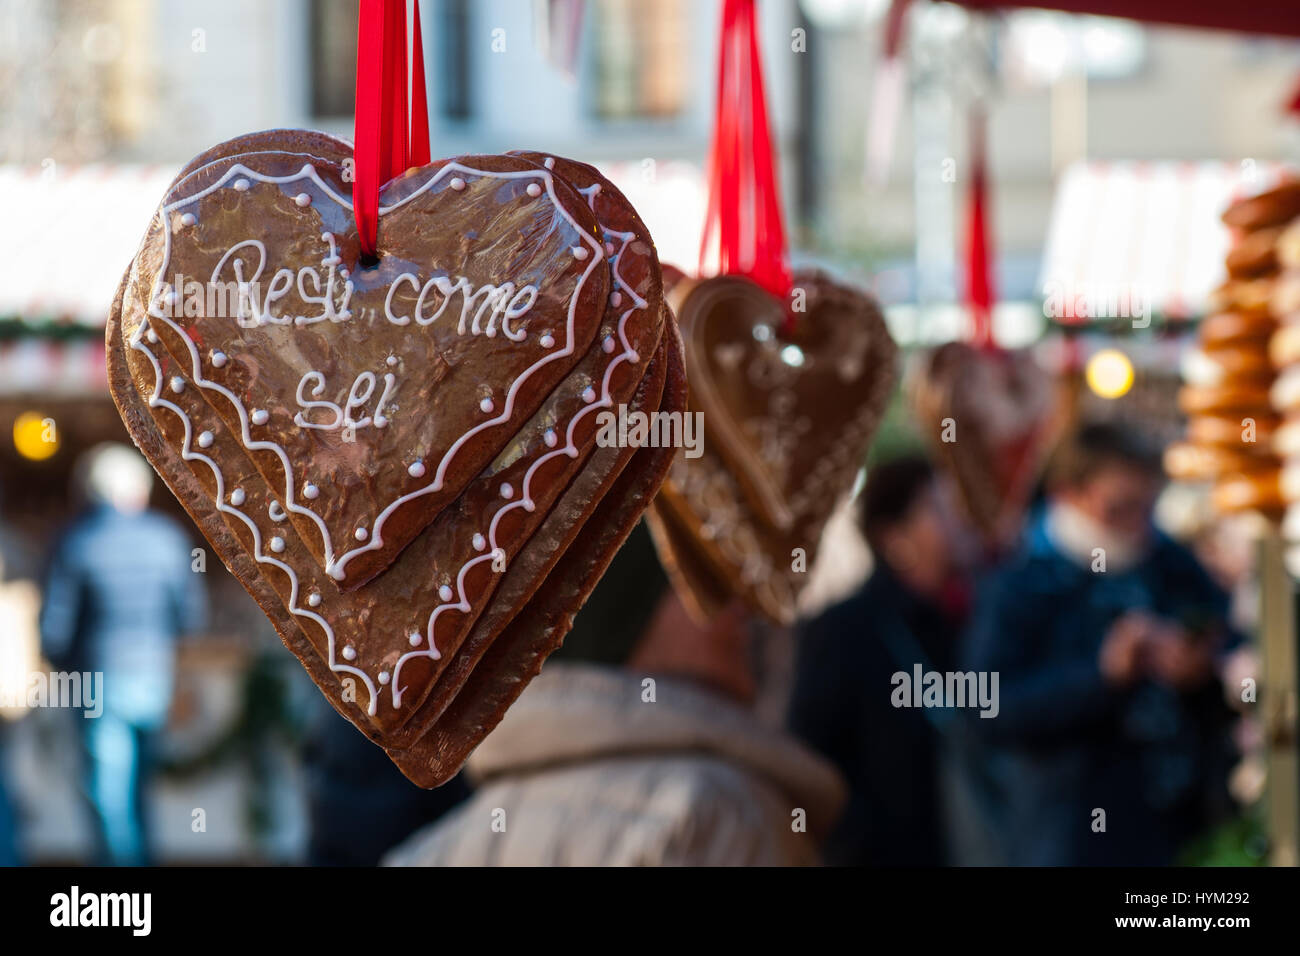 https://c8.alamy.com/comp/HYM292/hearts-made-with-chocolate-at-the-traditional-christmas-markets-of-HYM292.jpg